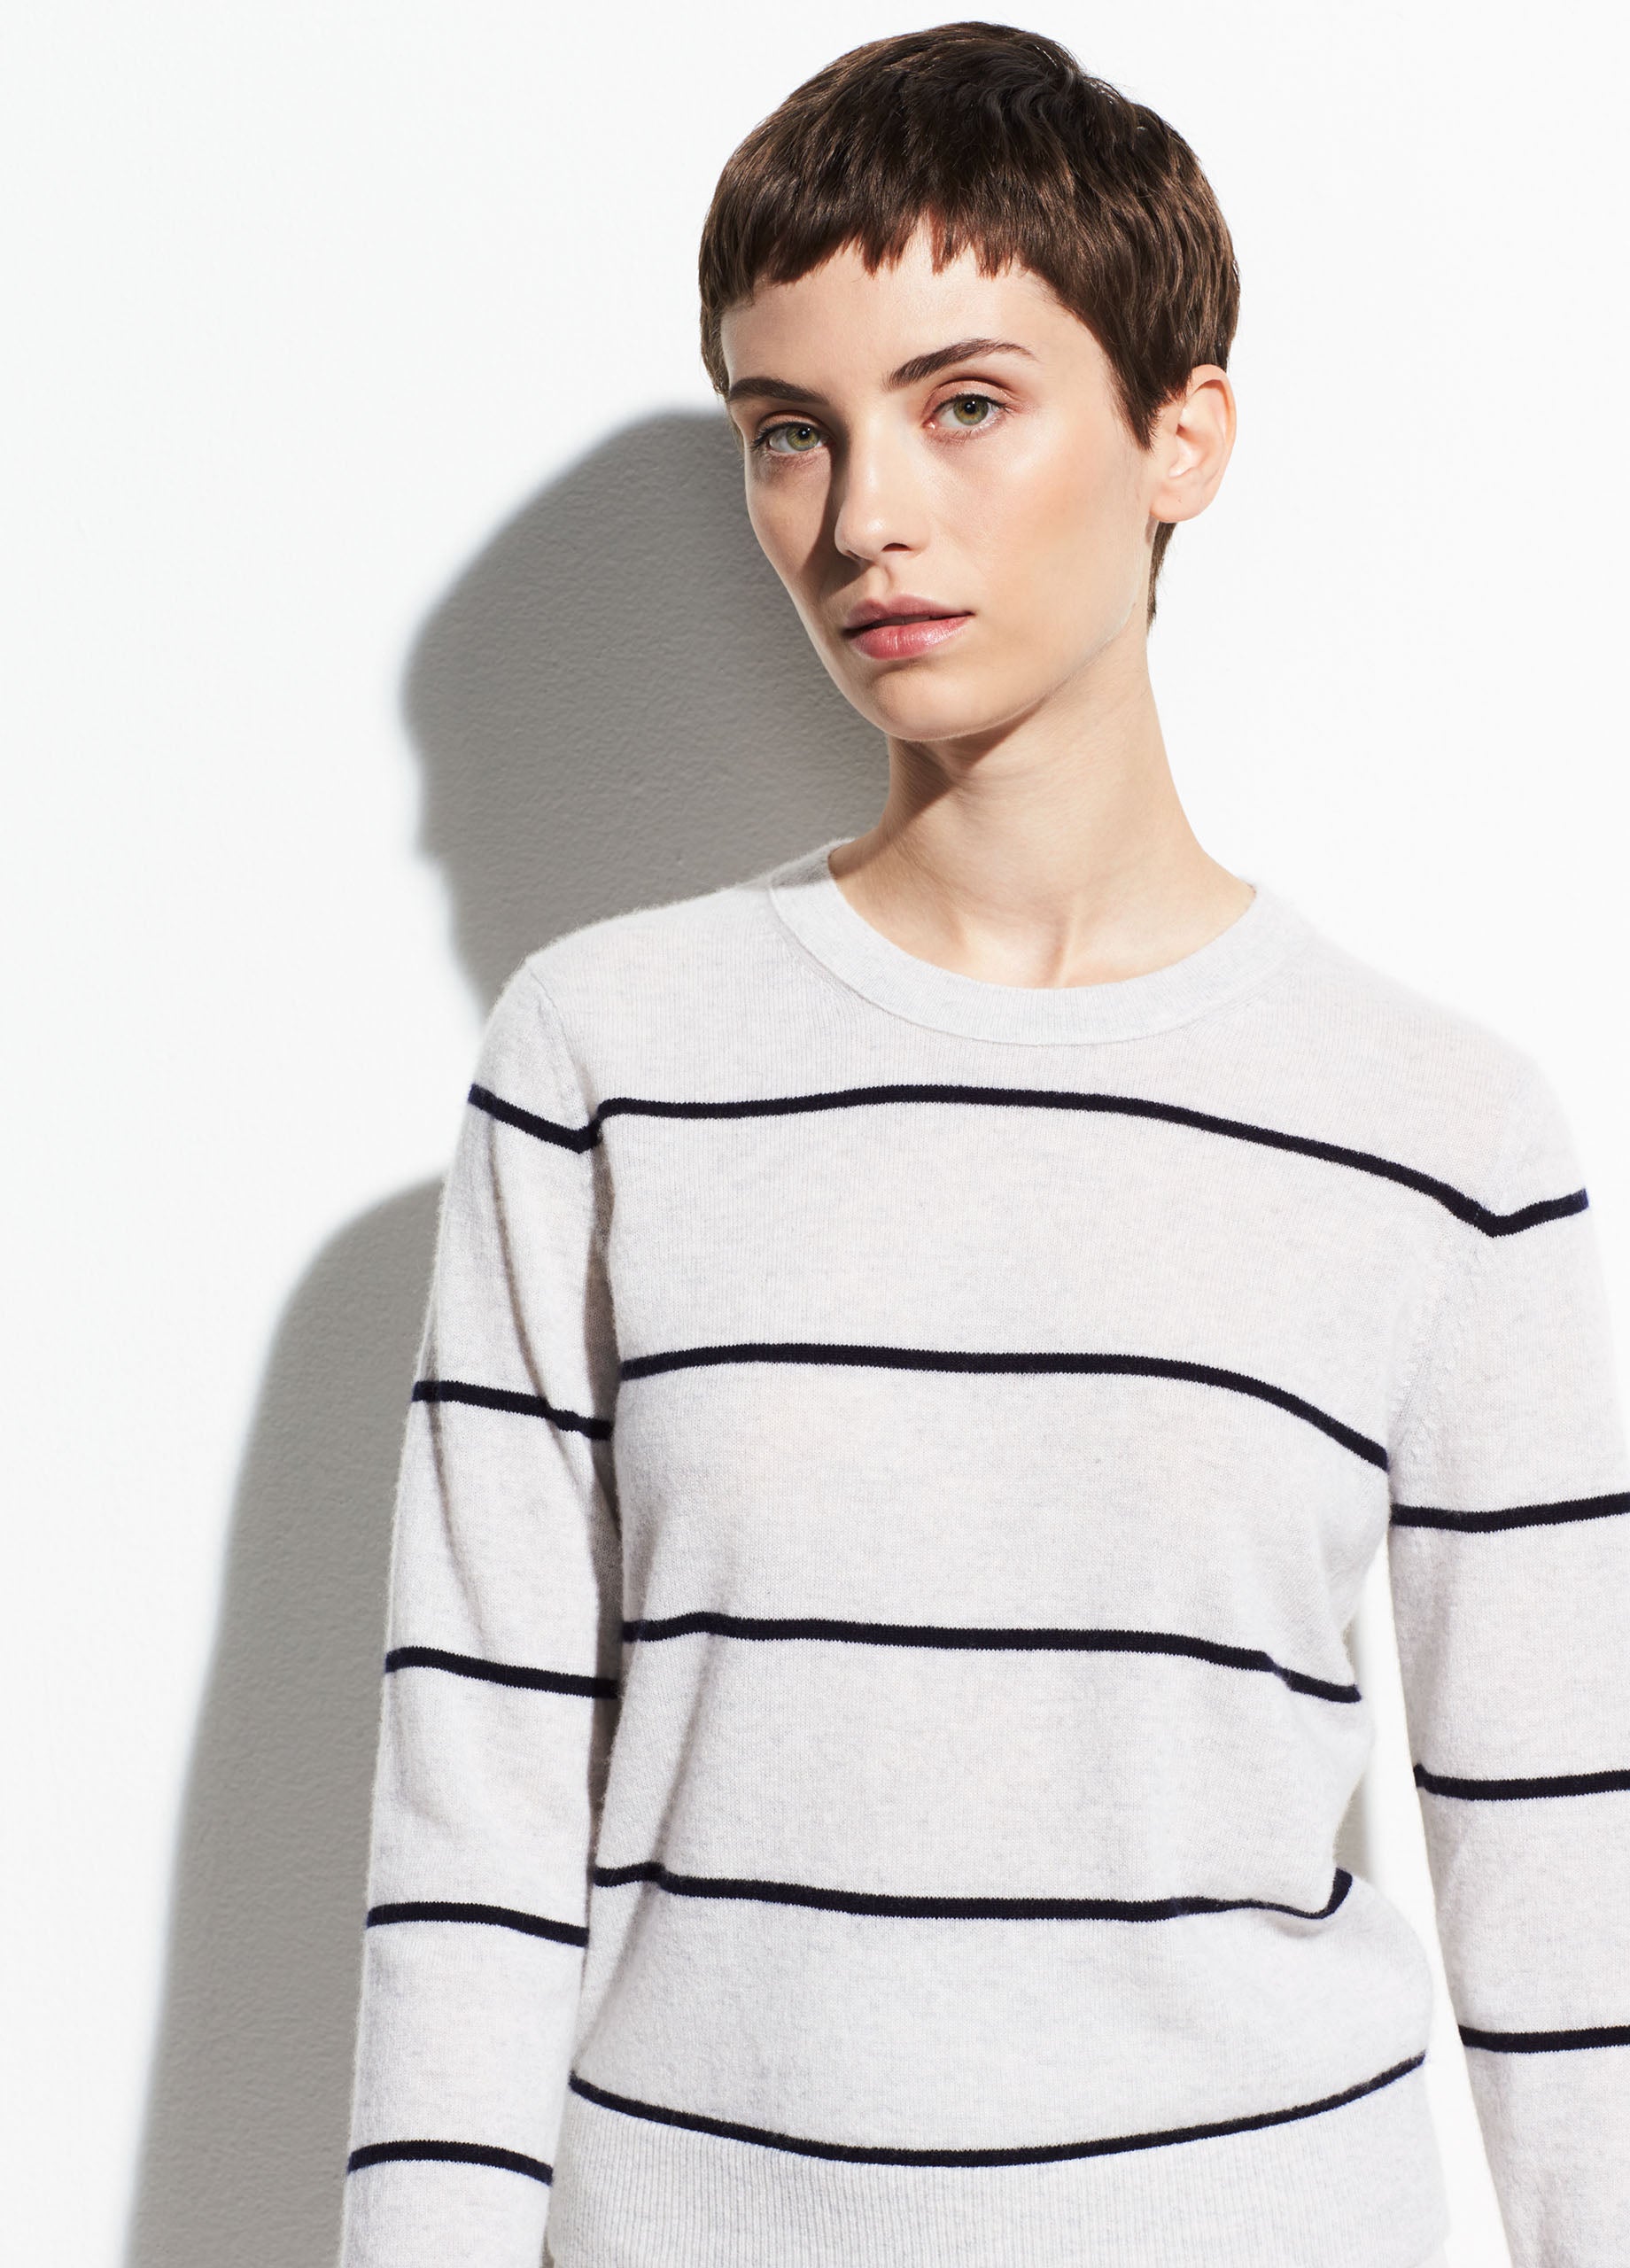 Vince | Striped Overlay Cashmere Crew in Heather Cloud/Coastal | Vince ...